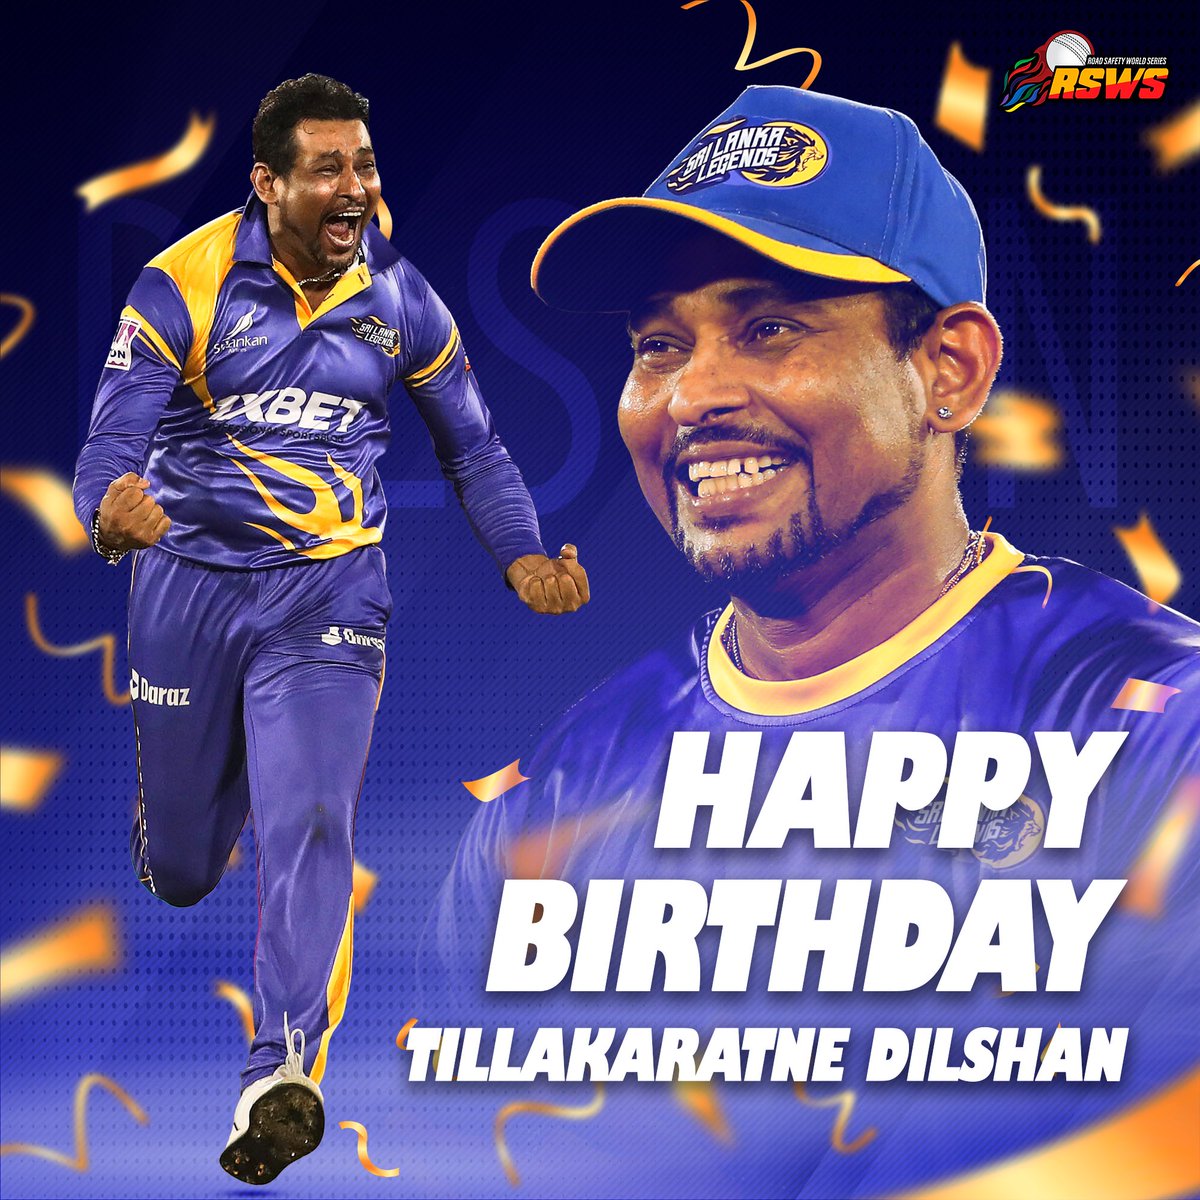 Wishing our @LegendsSri captain, Dilshan a Very Happy Birthday 💙

#RoadSafetyWorldSeries #RSWS #srilankalegends #dilshan #happybirthday #birthday #yehjunghailegendary